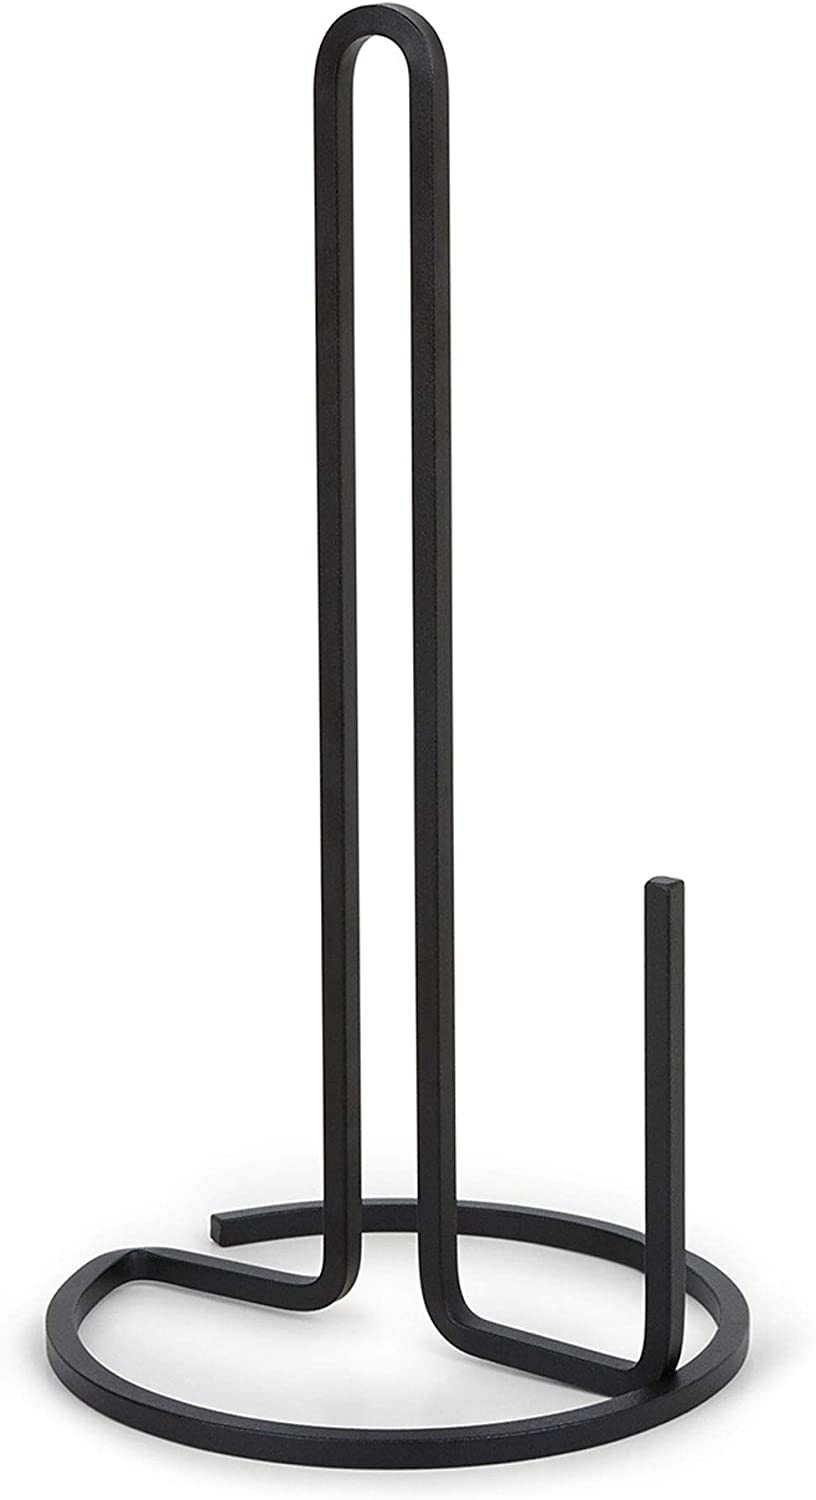 
Umbra Squire Stand-Up Paper Towel Holder with Bent Metal Wire Design and Black Finish for Kitchen or Bathroom 3